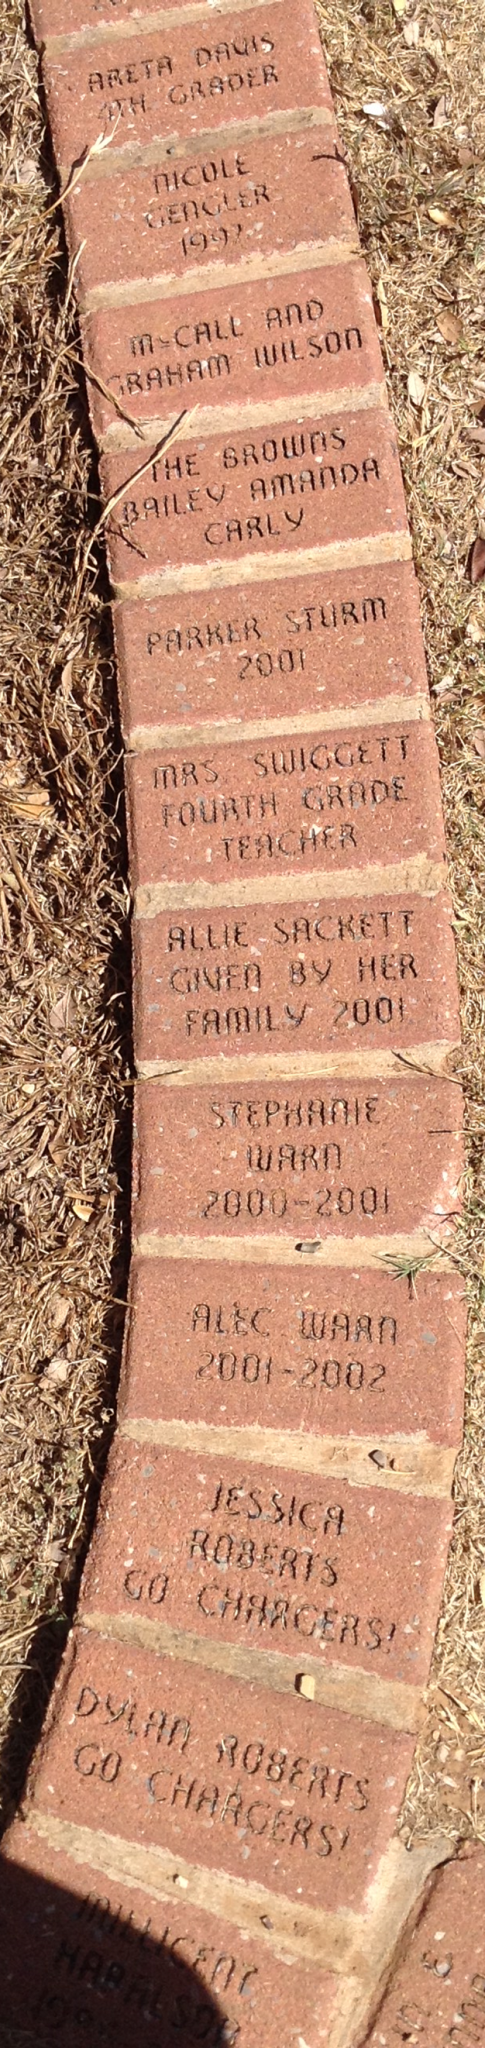 In 2002, the Sam and Jane Johnson family spearheaded an effort to construct a gazebo.  Bricks could be purchased by Chisholm famPicture6ilies and engraved with a special message or name.